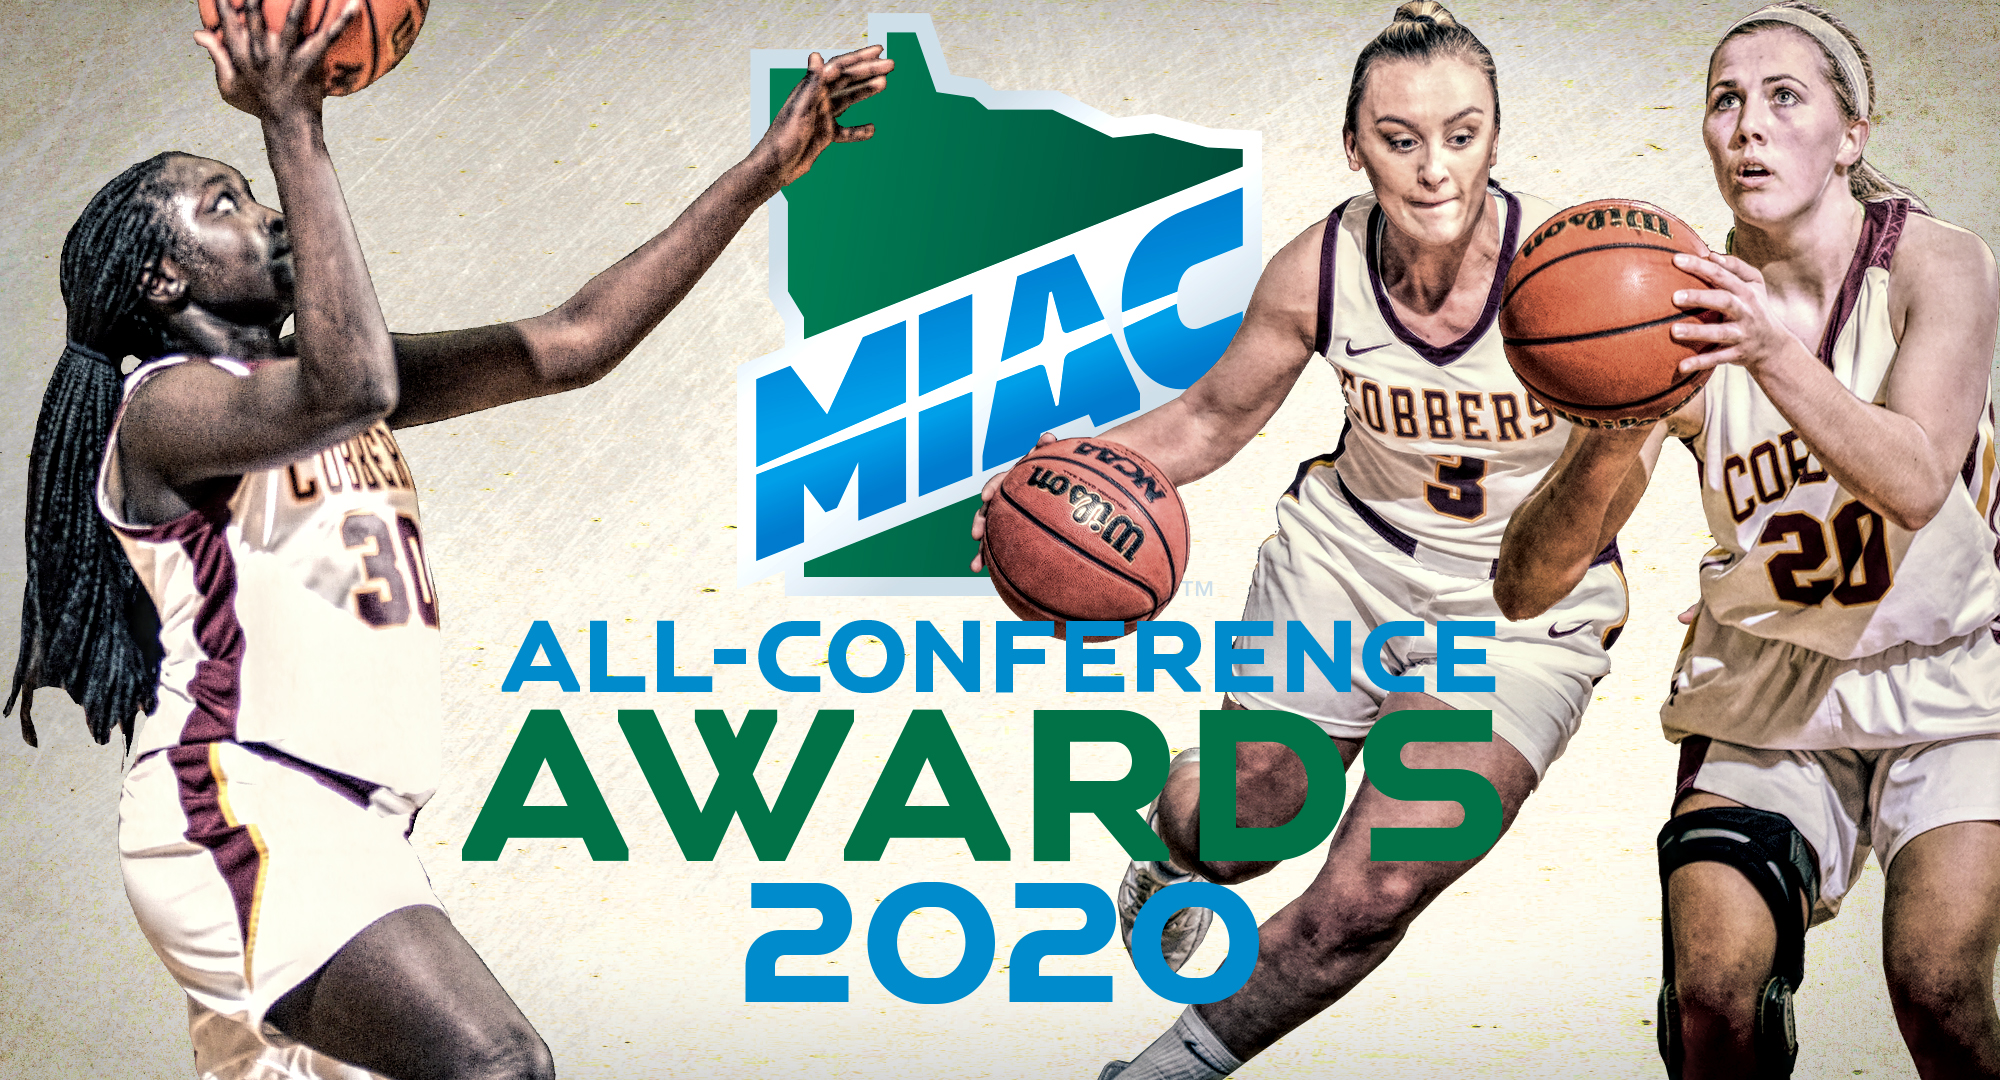 Mary Sem (L) and Autumn Thompson (M) were named to the MIAC All-Conference Team while Emily Bseman (R) earned All-First-Year Team honors.